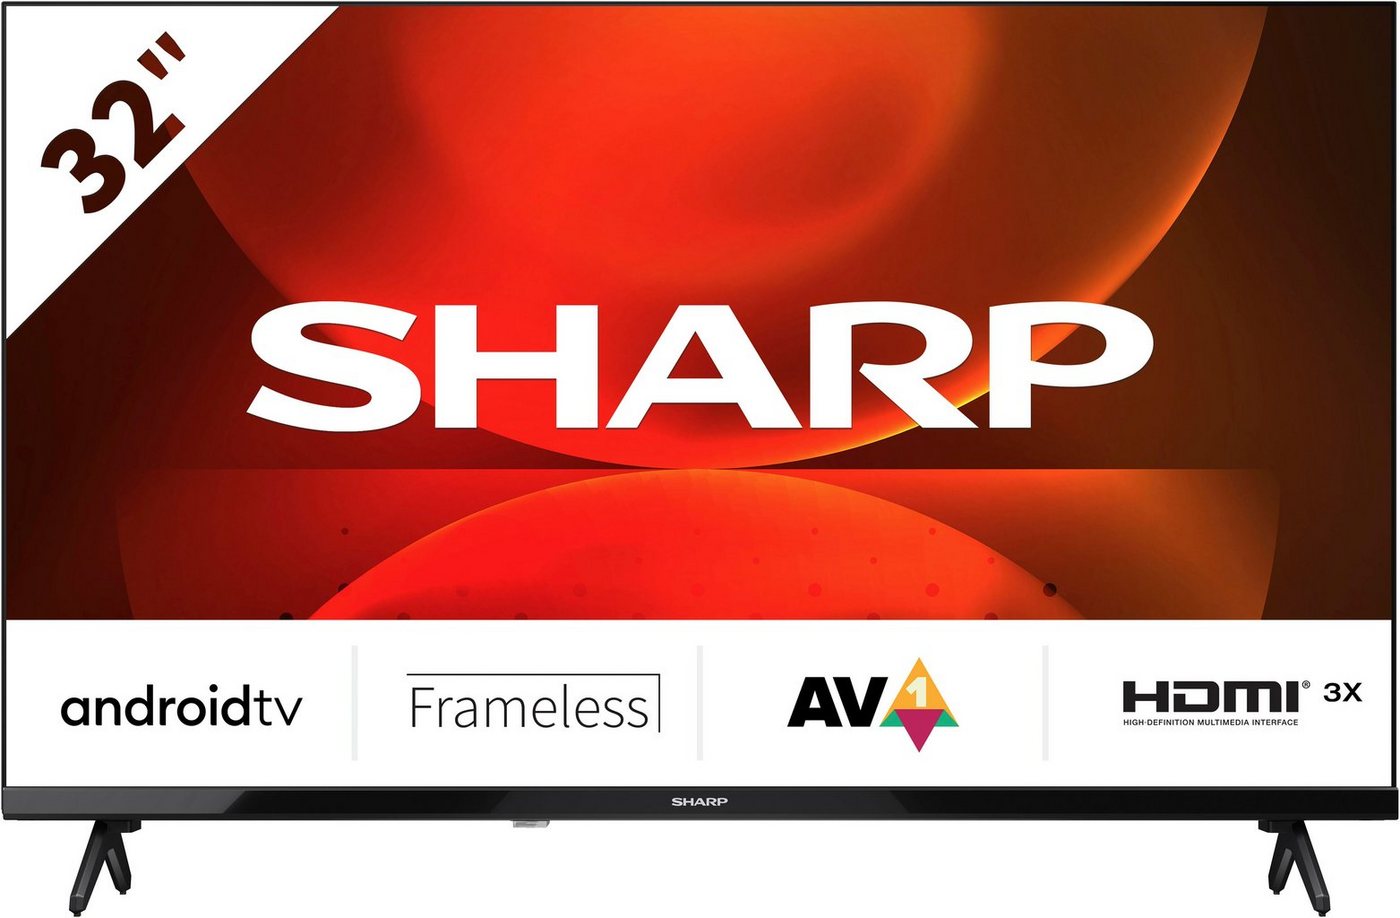 Sharp 1T-C32FHx LED-Fernseher (80 cm/32 Zoll, HD-ready, Android TV, Smart-TV, Frameless Android TV, 3X HDMI) von Sharp